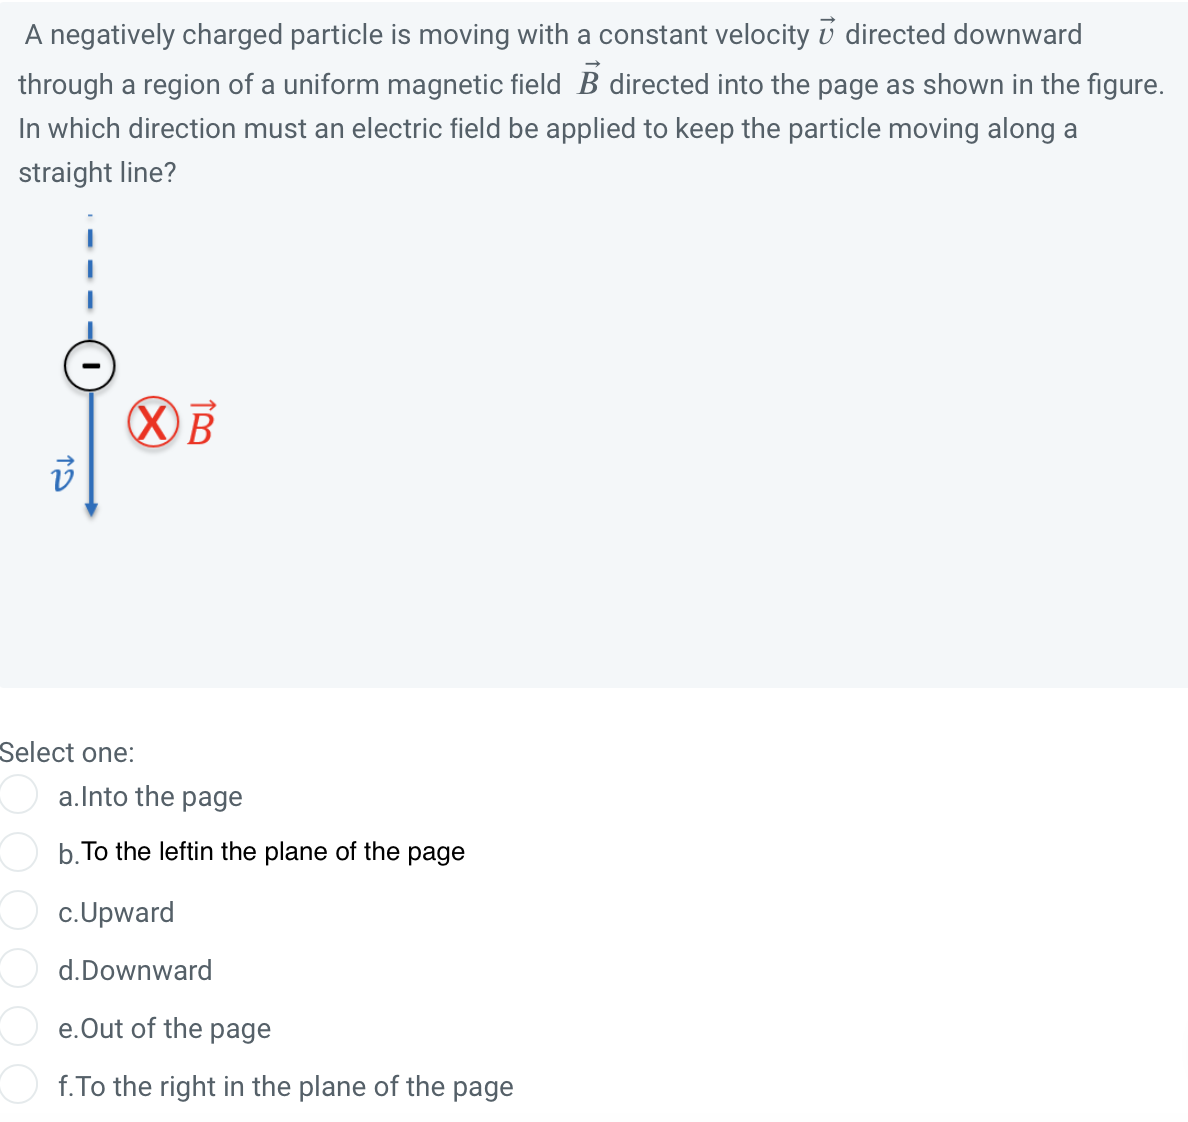 A negatively charged particle is moving with a constant velocity 7 directed downward
through a region of a uniform magnetic field B directed into the page as shown in the figure.
In which direction must an electric field be applied to keep the particle moving along a
straight line?
i
XB
Select one:
a.Into the page
b. To the leftin the plane of the page
c. Upward
d.Downward
e. Out of the page
f.To the right in the plane of the page